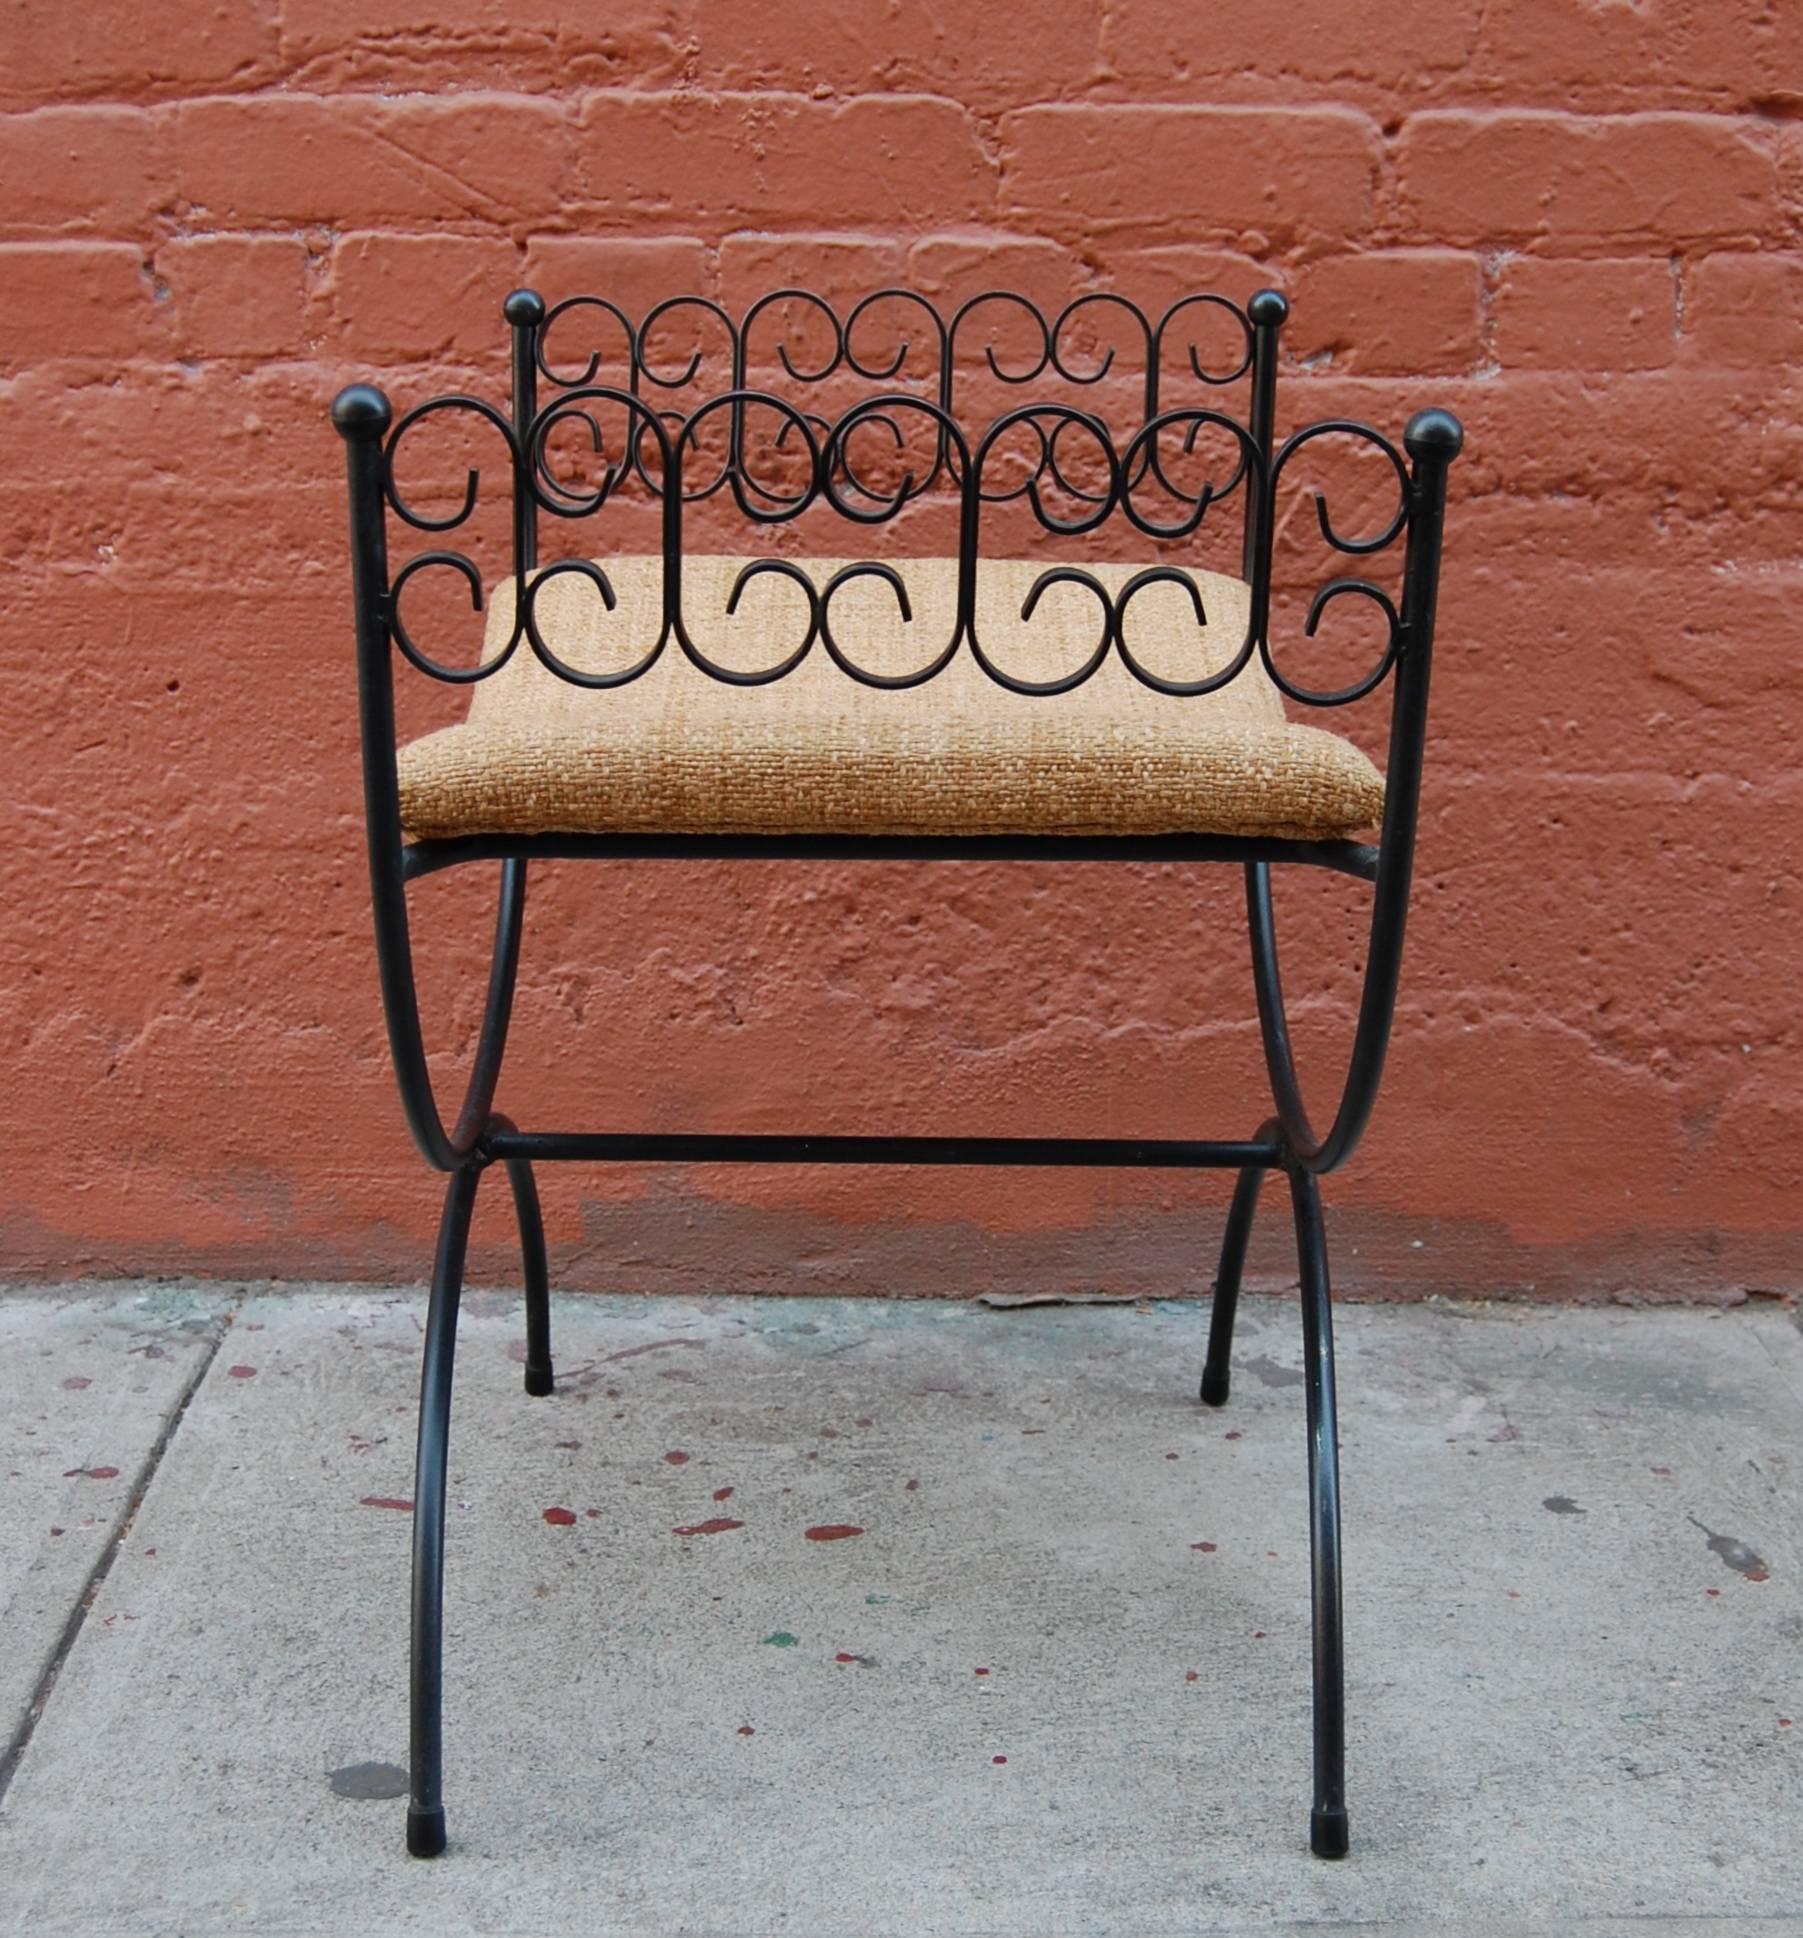 Wrought iron bench or vanity stool #C116 princess bench designed by New York designer Arthur Umanoff for Shaver - Howard & Boyuer - Scott and distributed through Raymor. Original black lacquer finish with new Knoll Sonnet Butterscotch upholstery